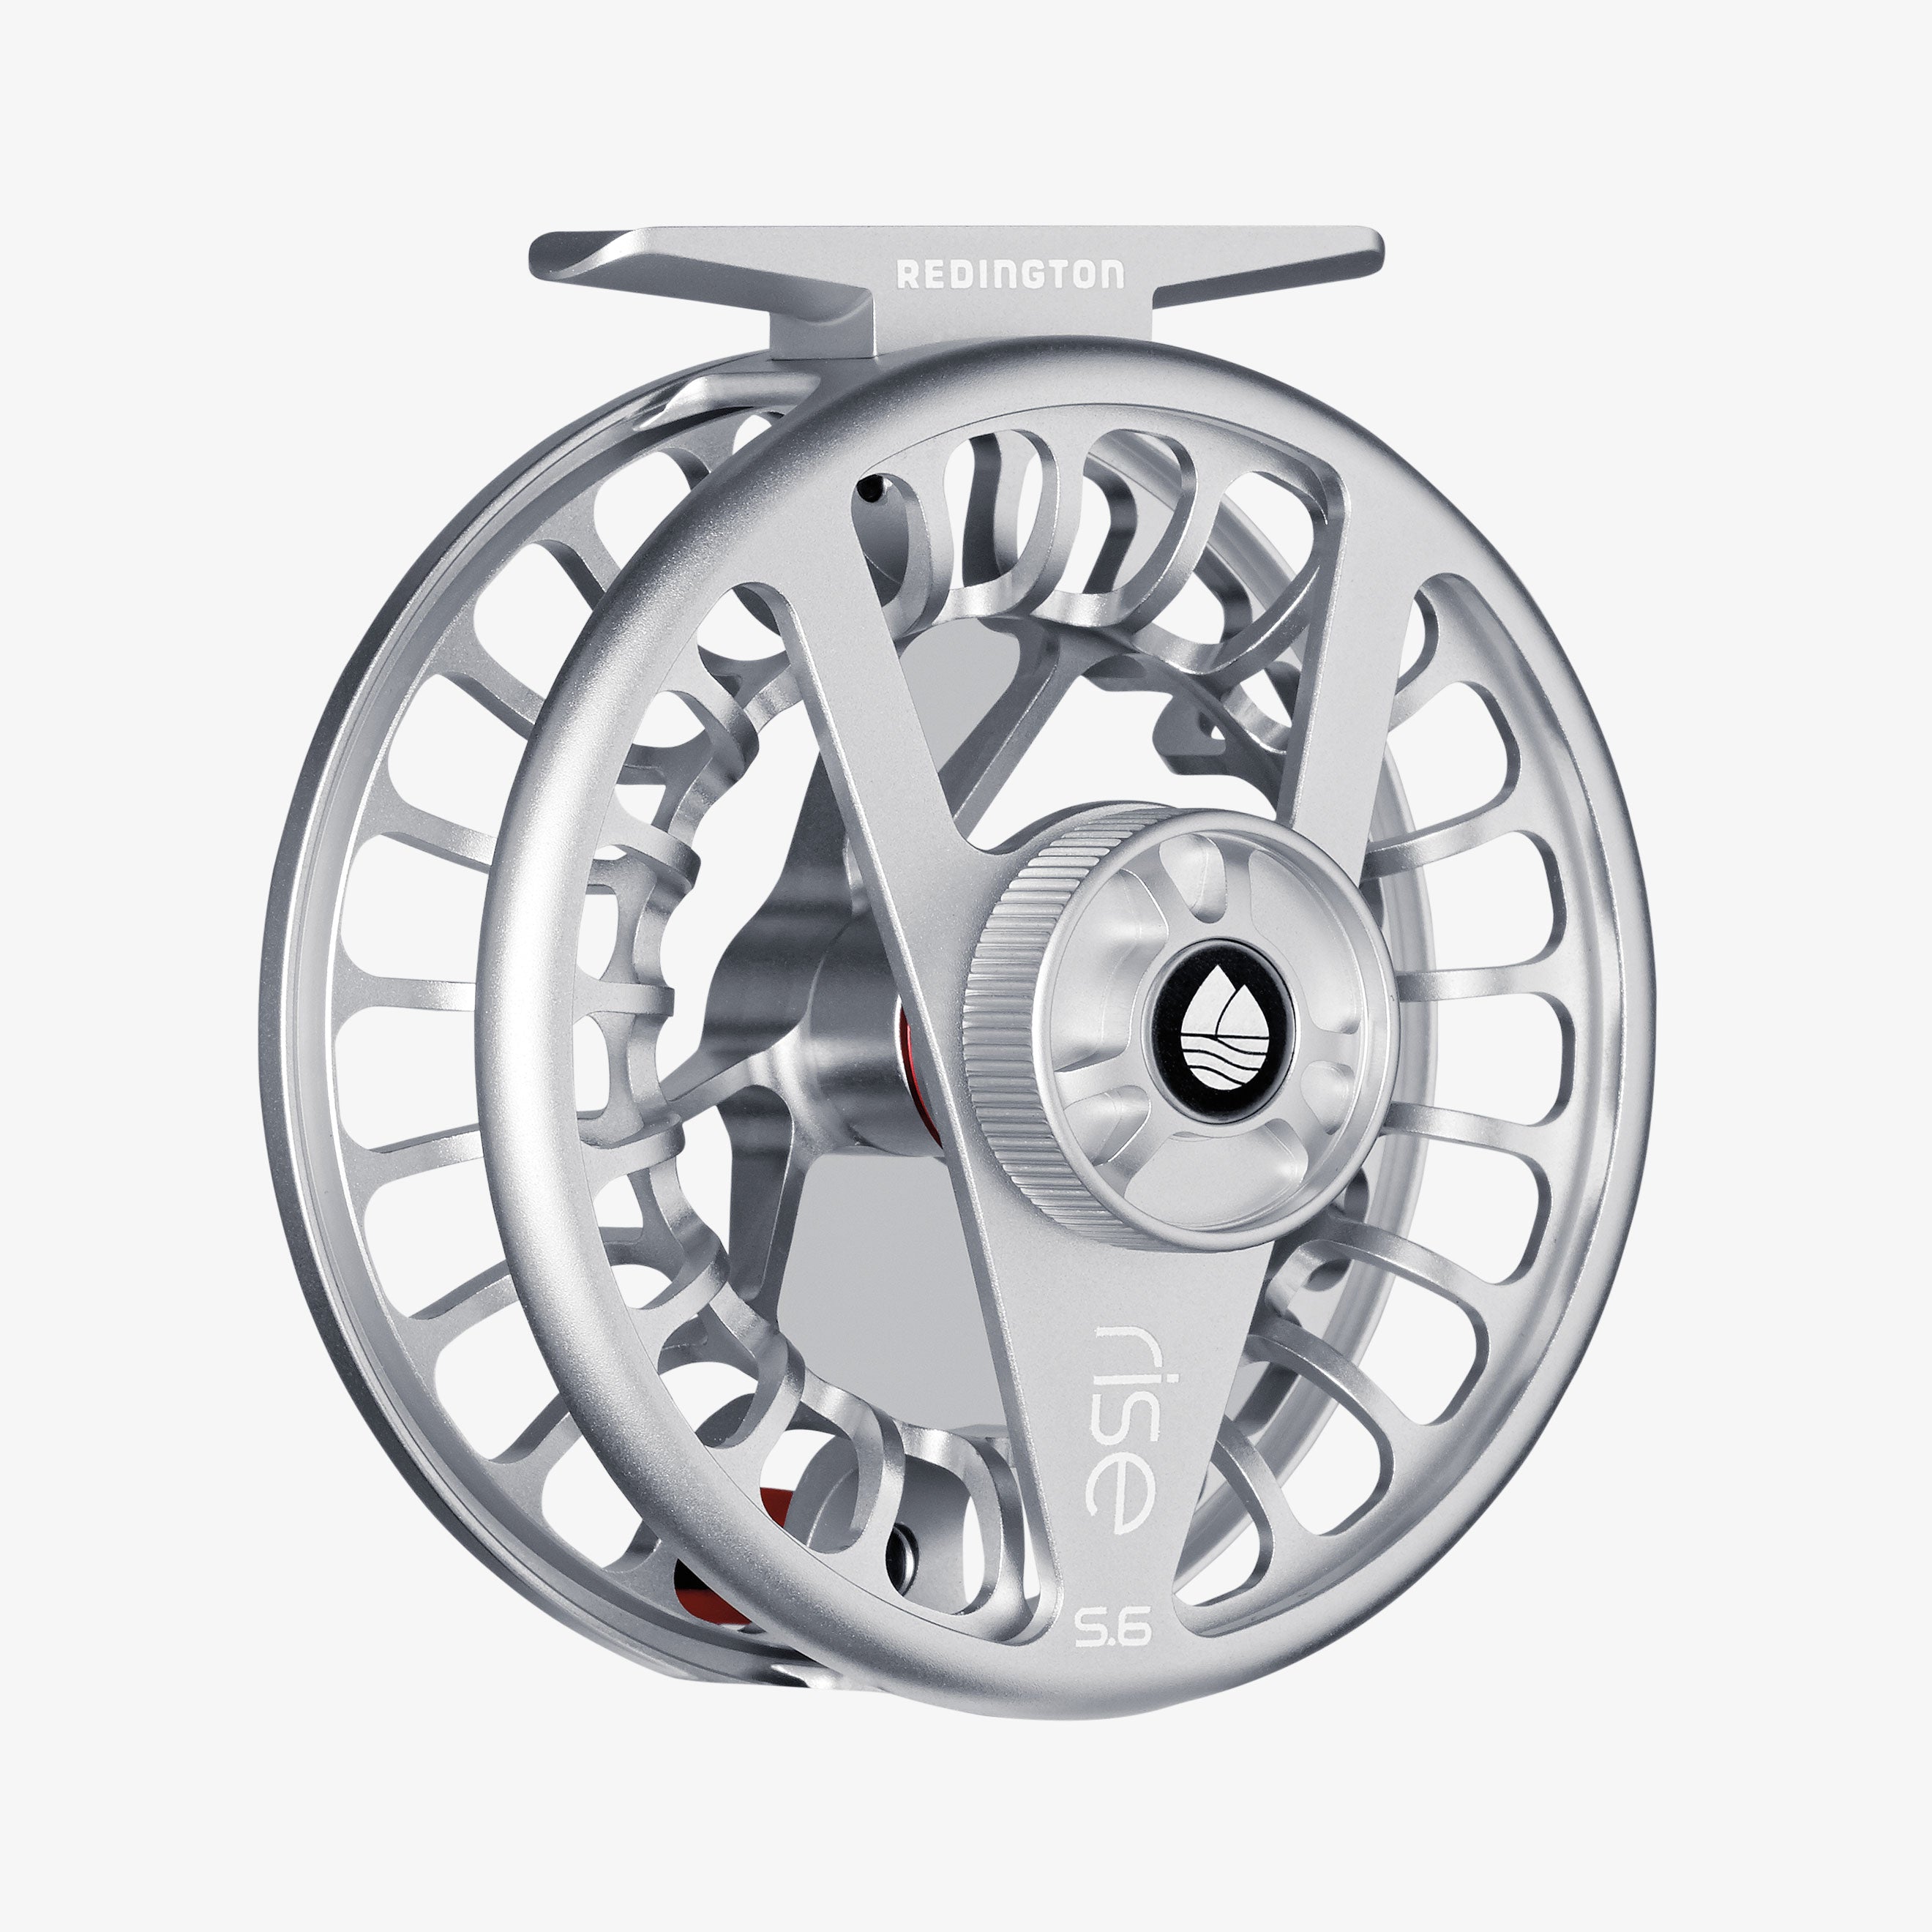 RISE Fly Fishing Reel 9/10